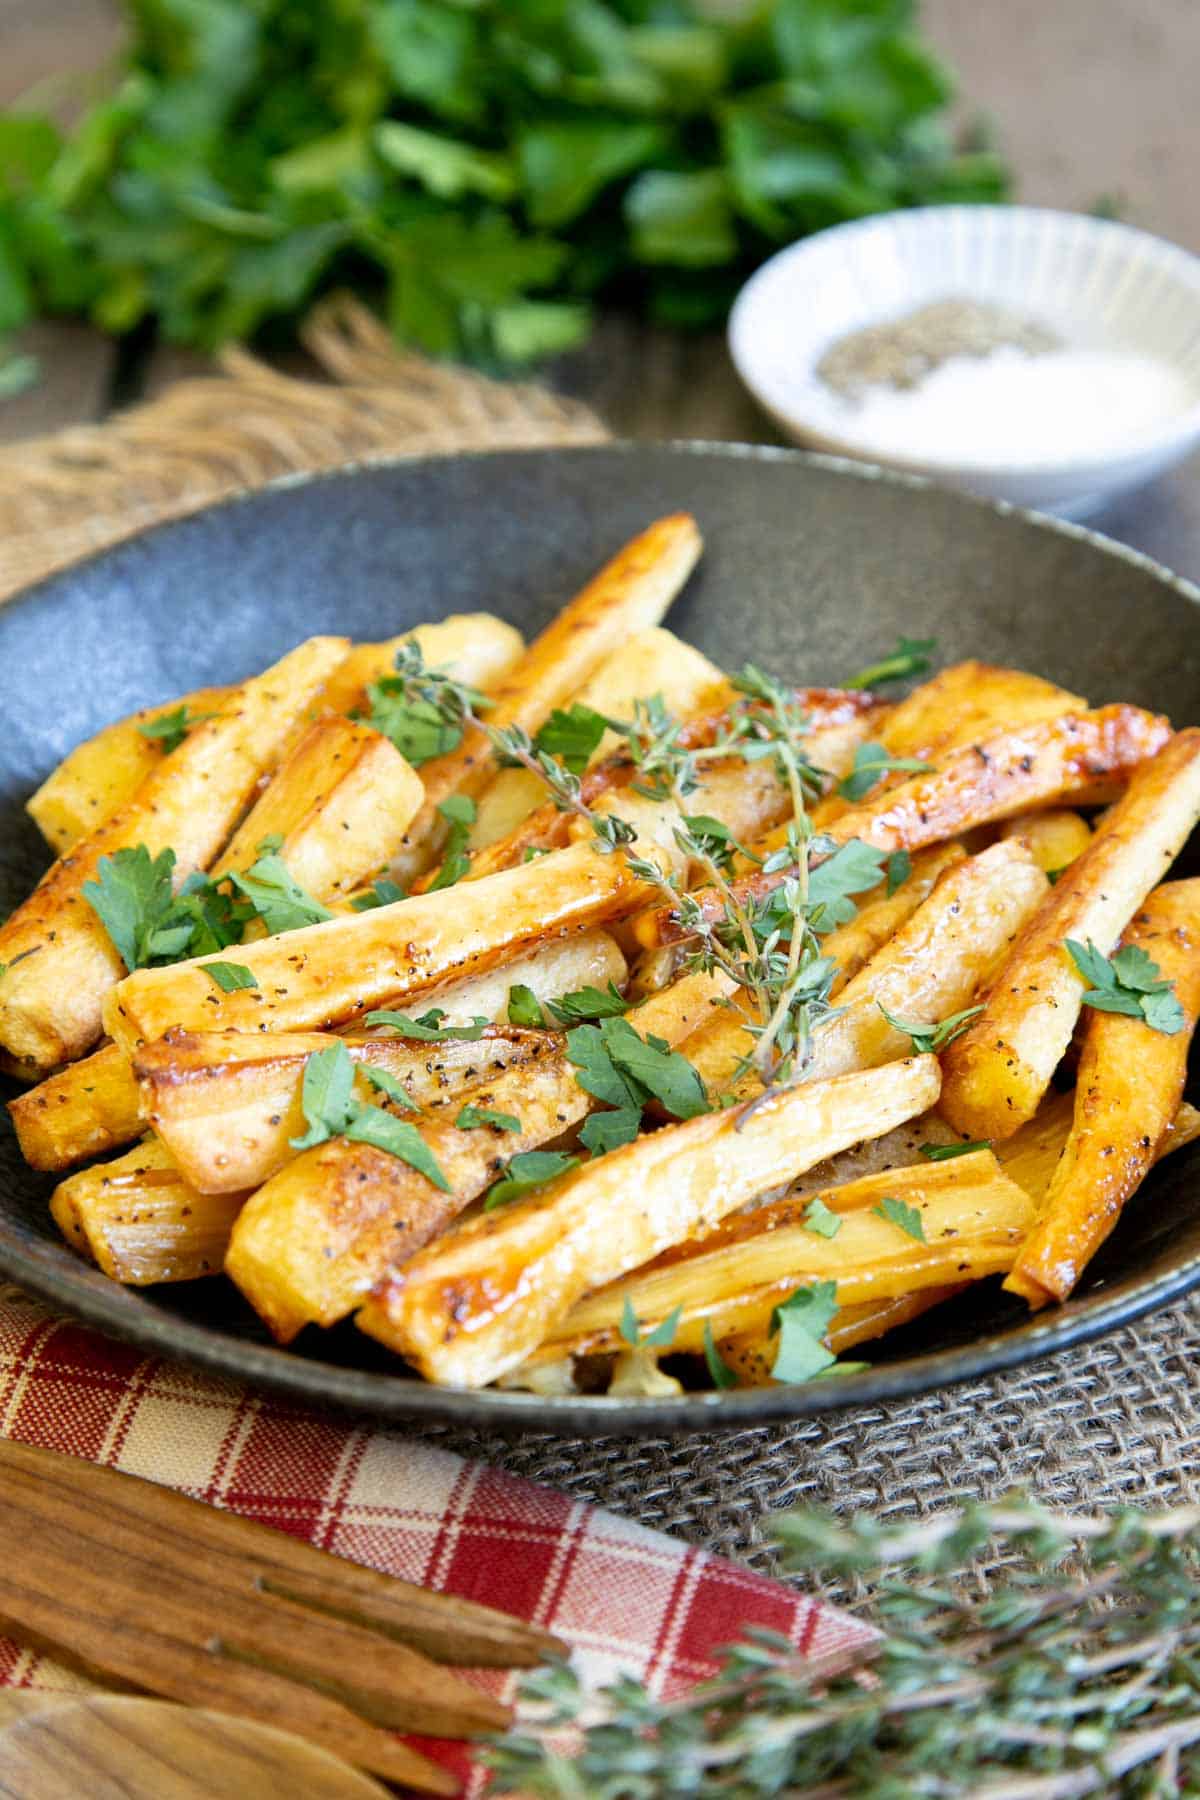 Honey roast parsnips on the table, ready to serve as part of a traditional roast or any of your favourite dishes.